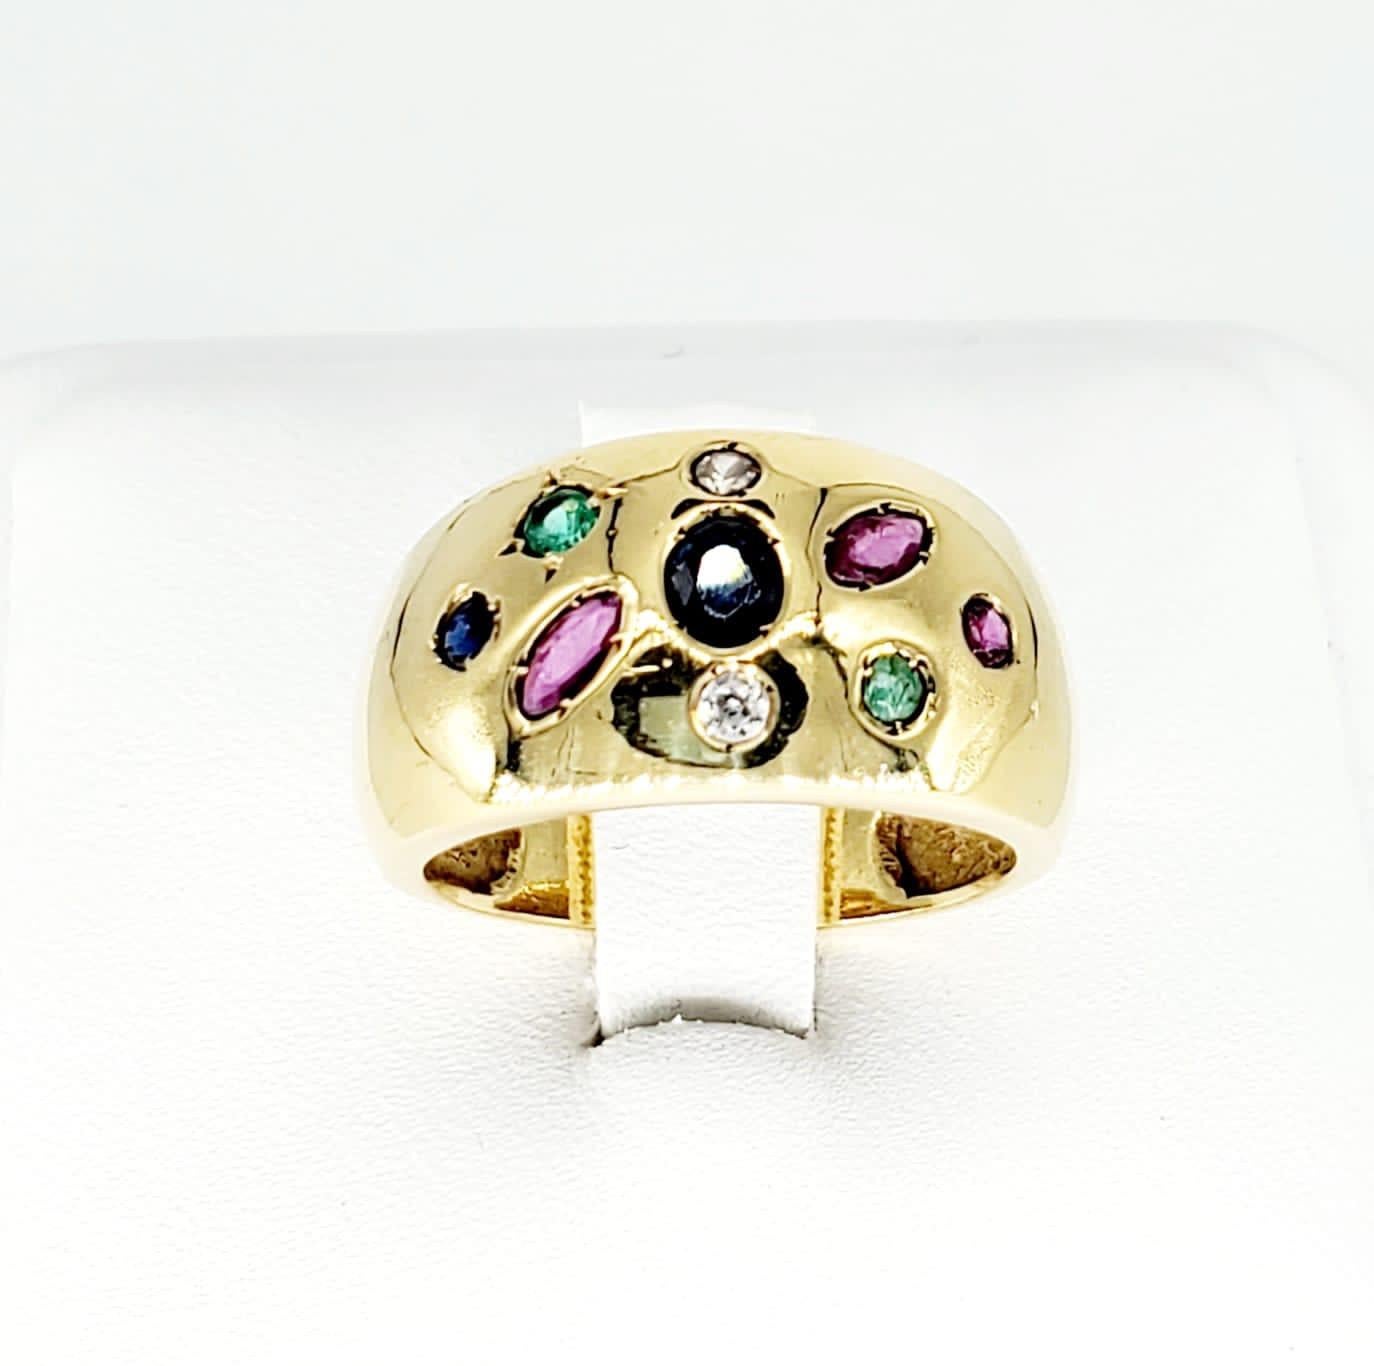 Vintage Various Shapes Ruby, Sapphire, Emerald & Diamond 18k Gold Dome Ring. The total approx carat is 1 carat. The ring is made of 18k solid yellow gold and weights 4.5 grams. The ring is a size 7